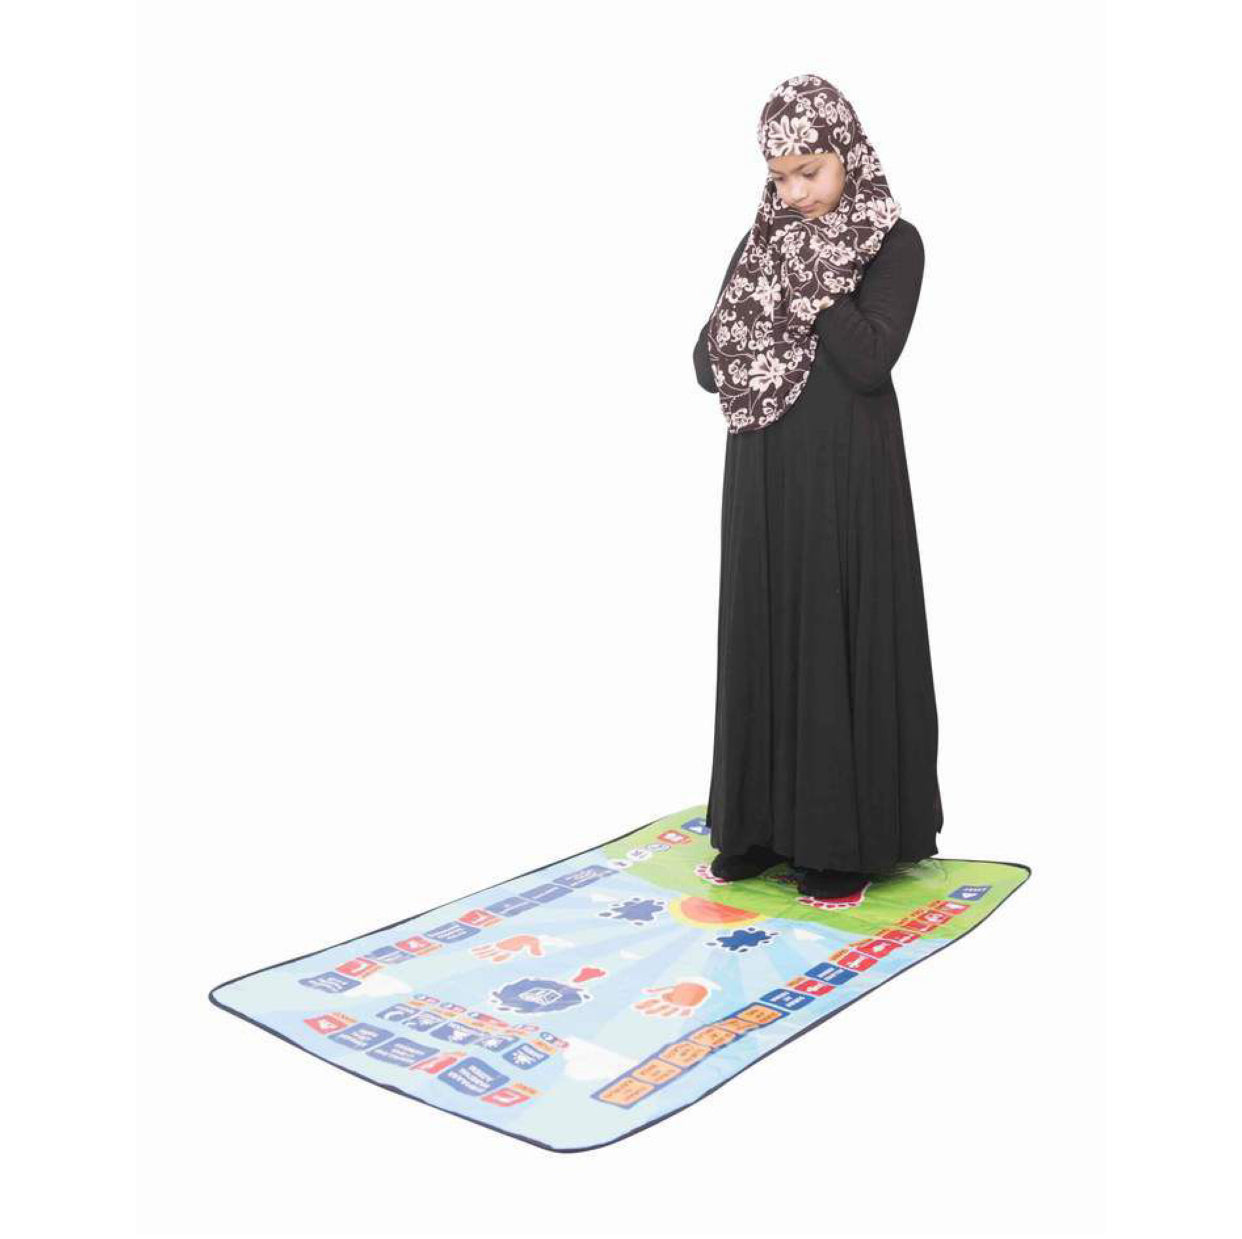 Kids' educational prayer mat with free Iqrah book marker